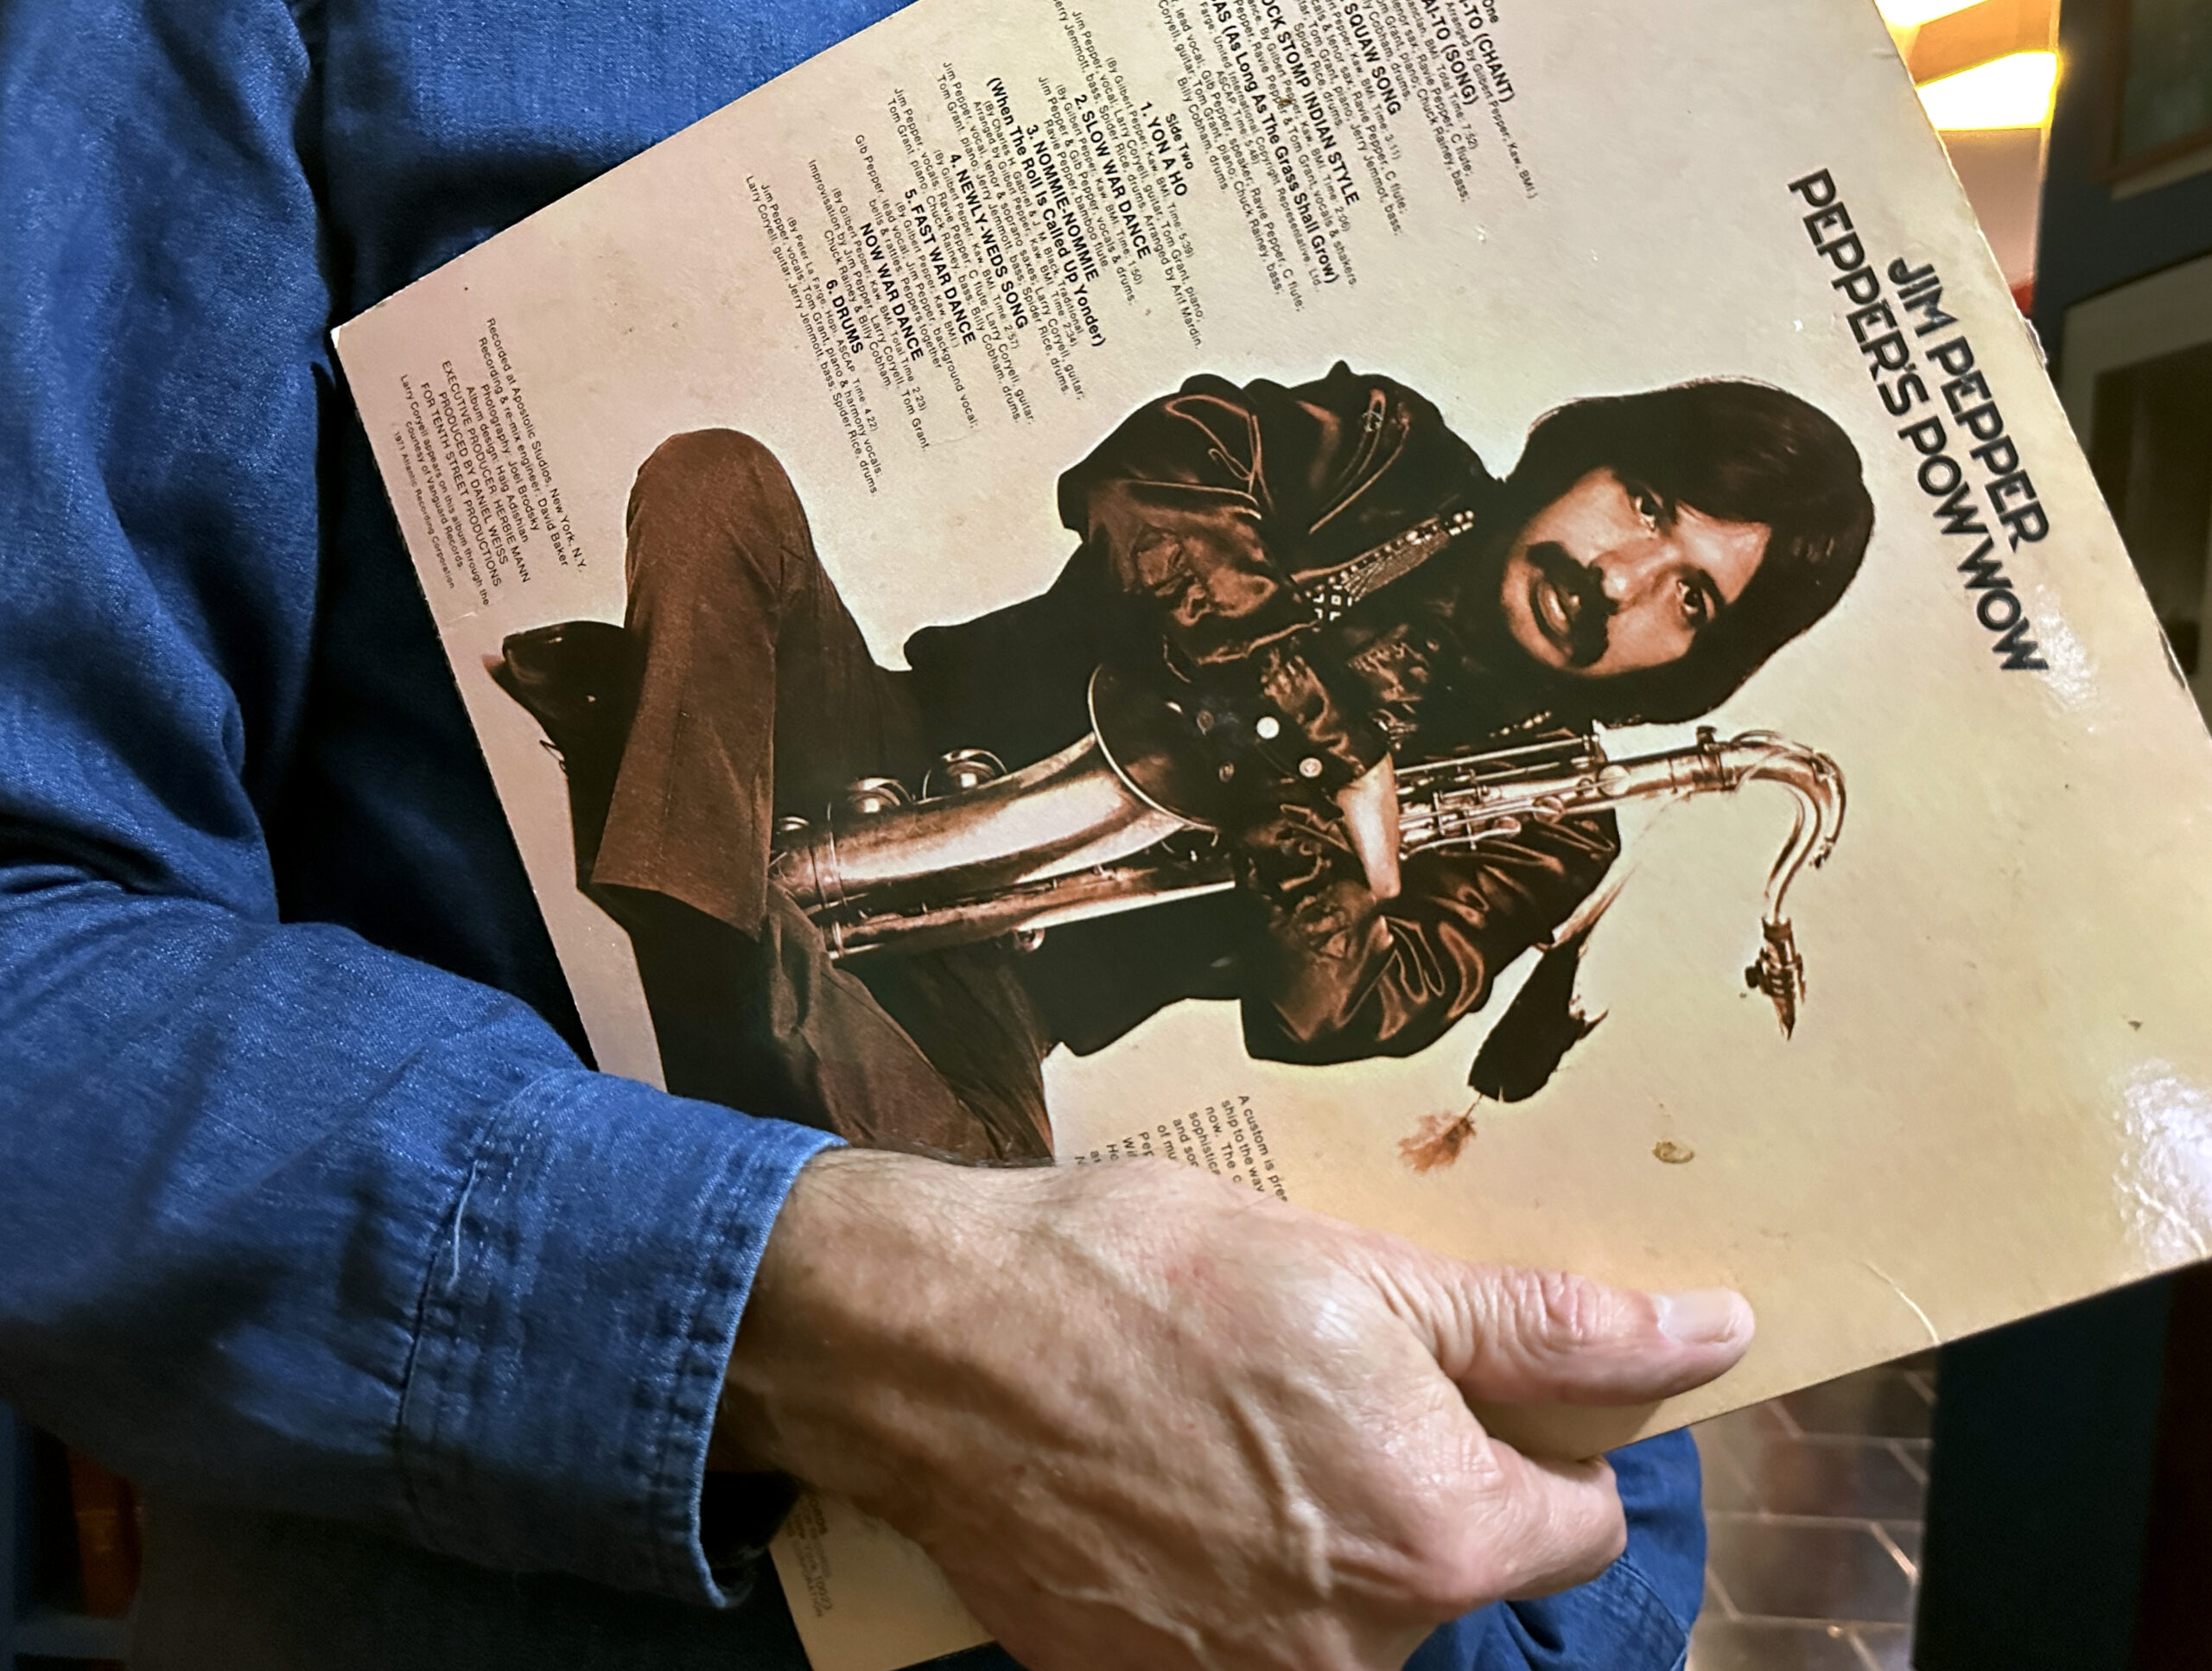 Sean Cruz holds Jim Pepper’s 1971 debut album, Jim Pepper’s POW WOW in his arms. Jim Pepper is pictured sitting cross-legged with a saxophone in his arms.